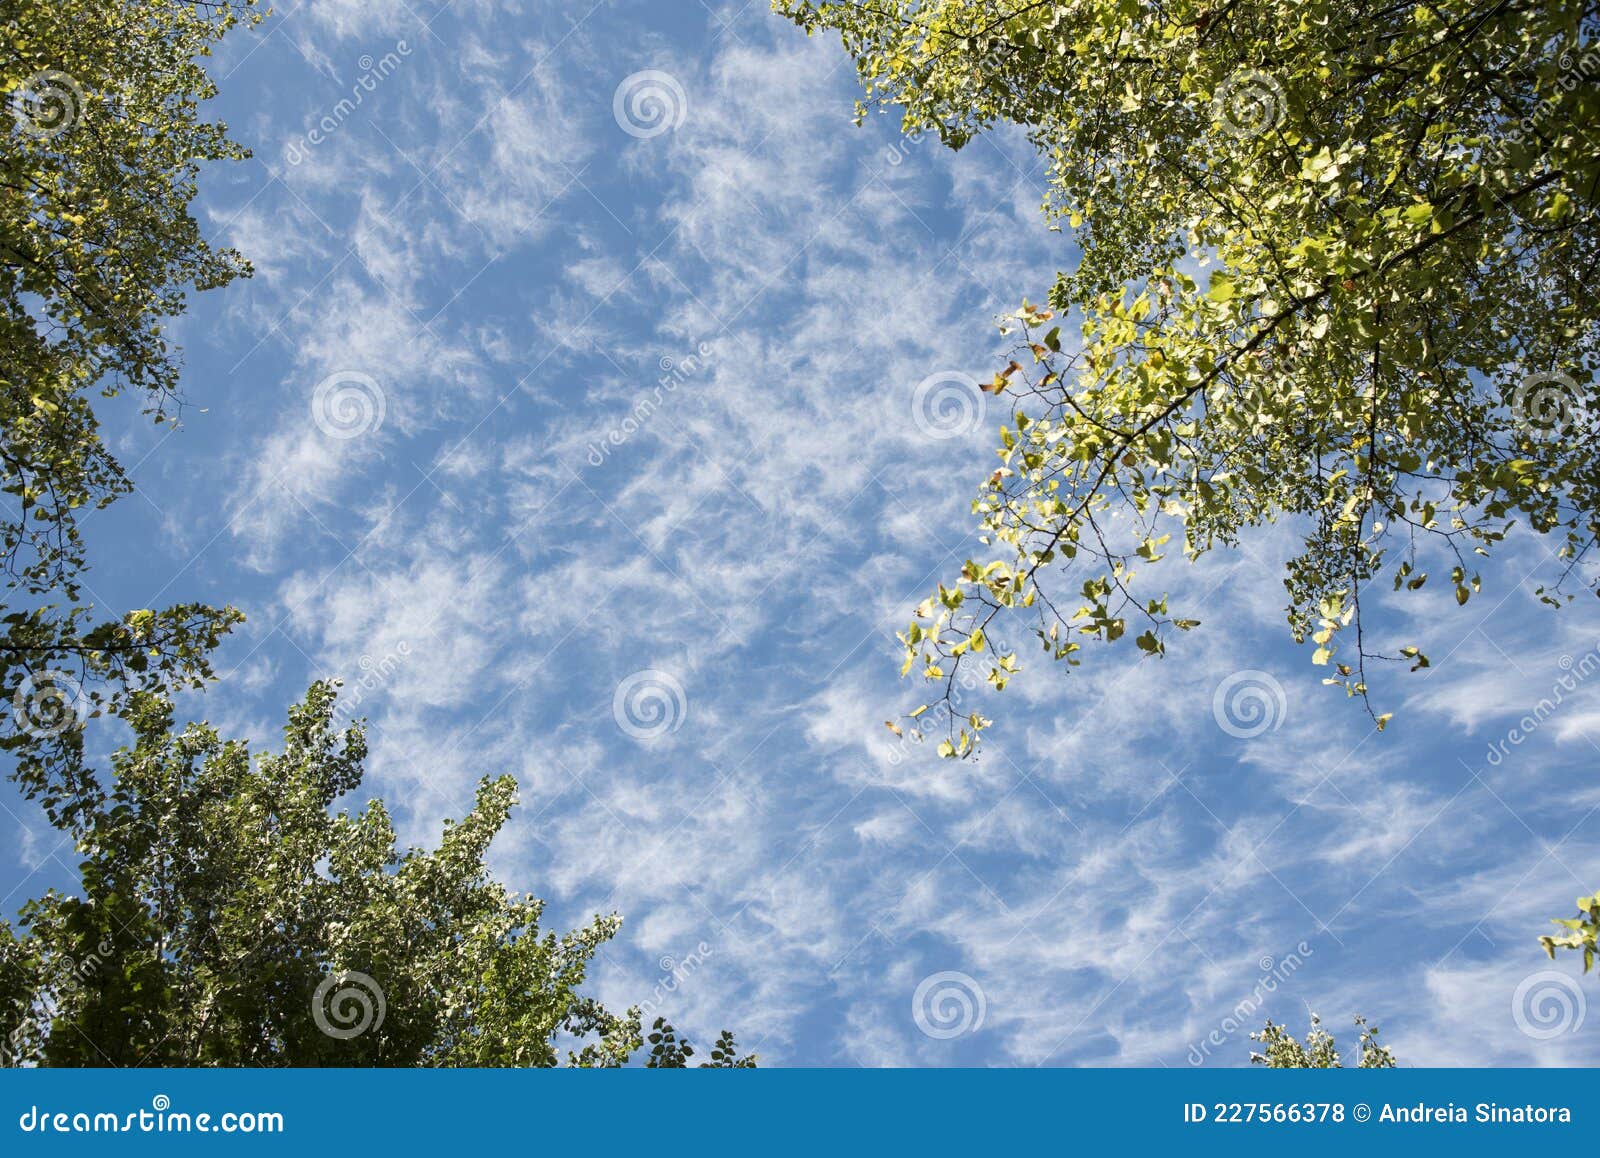 blue sky and fluffy clouds in a park